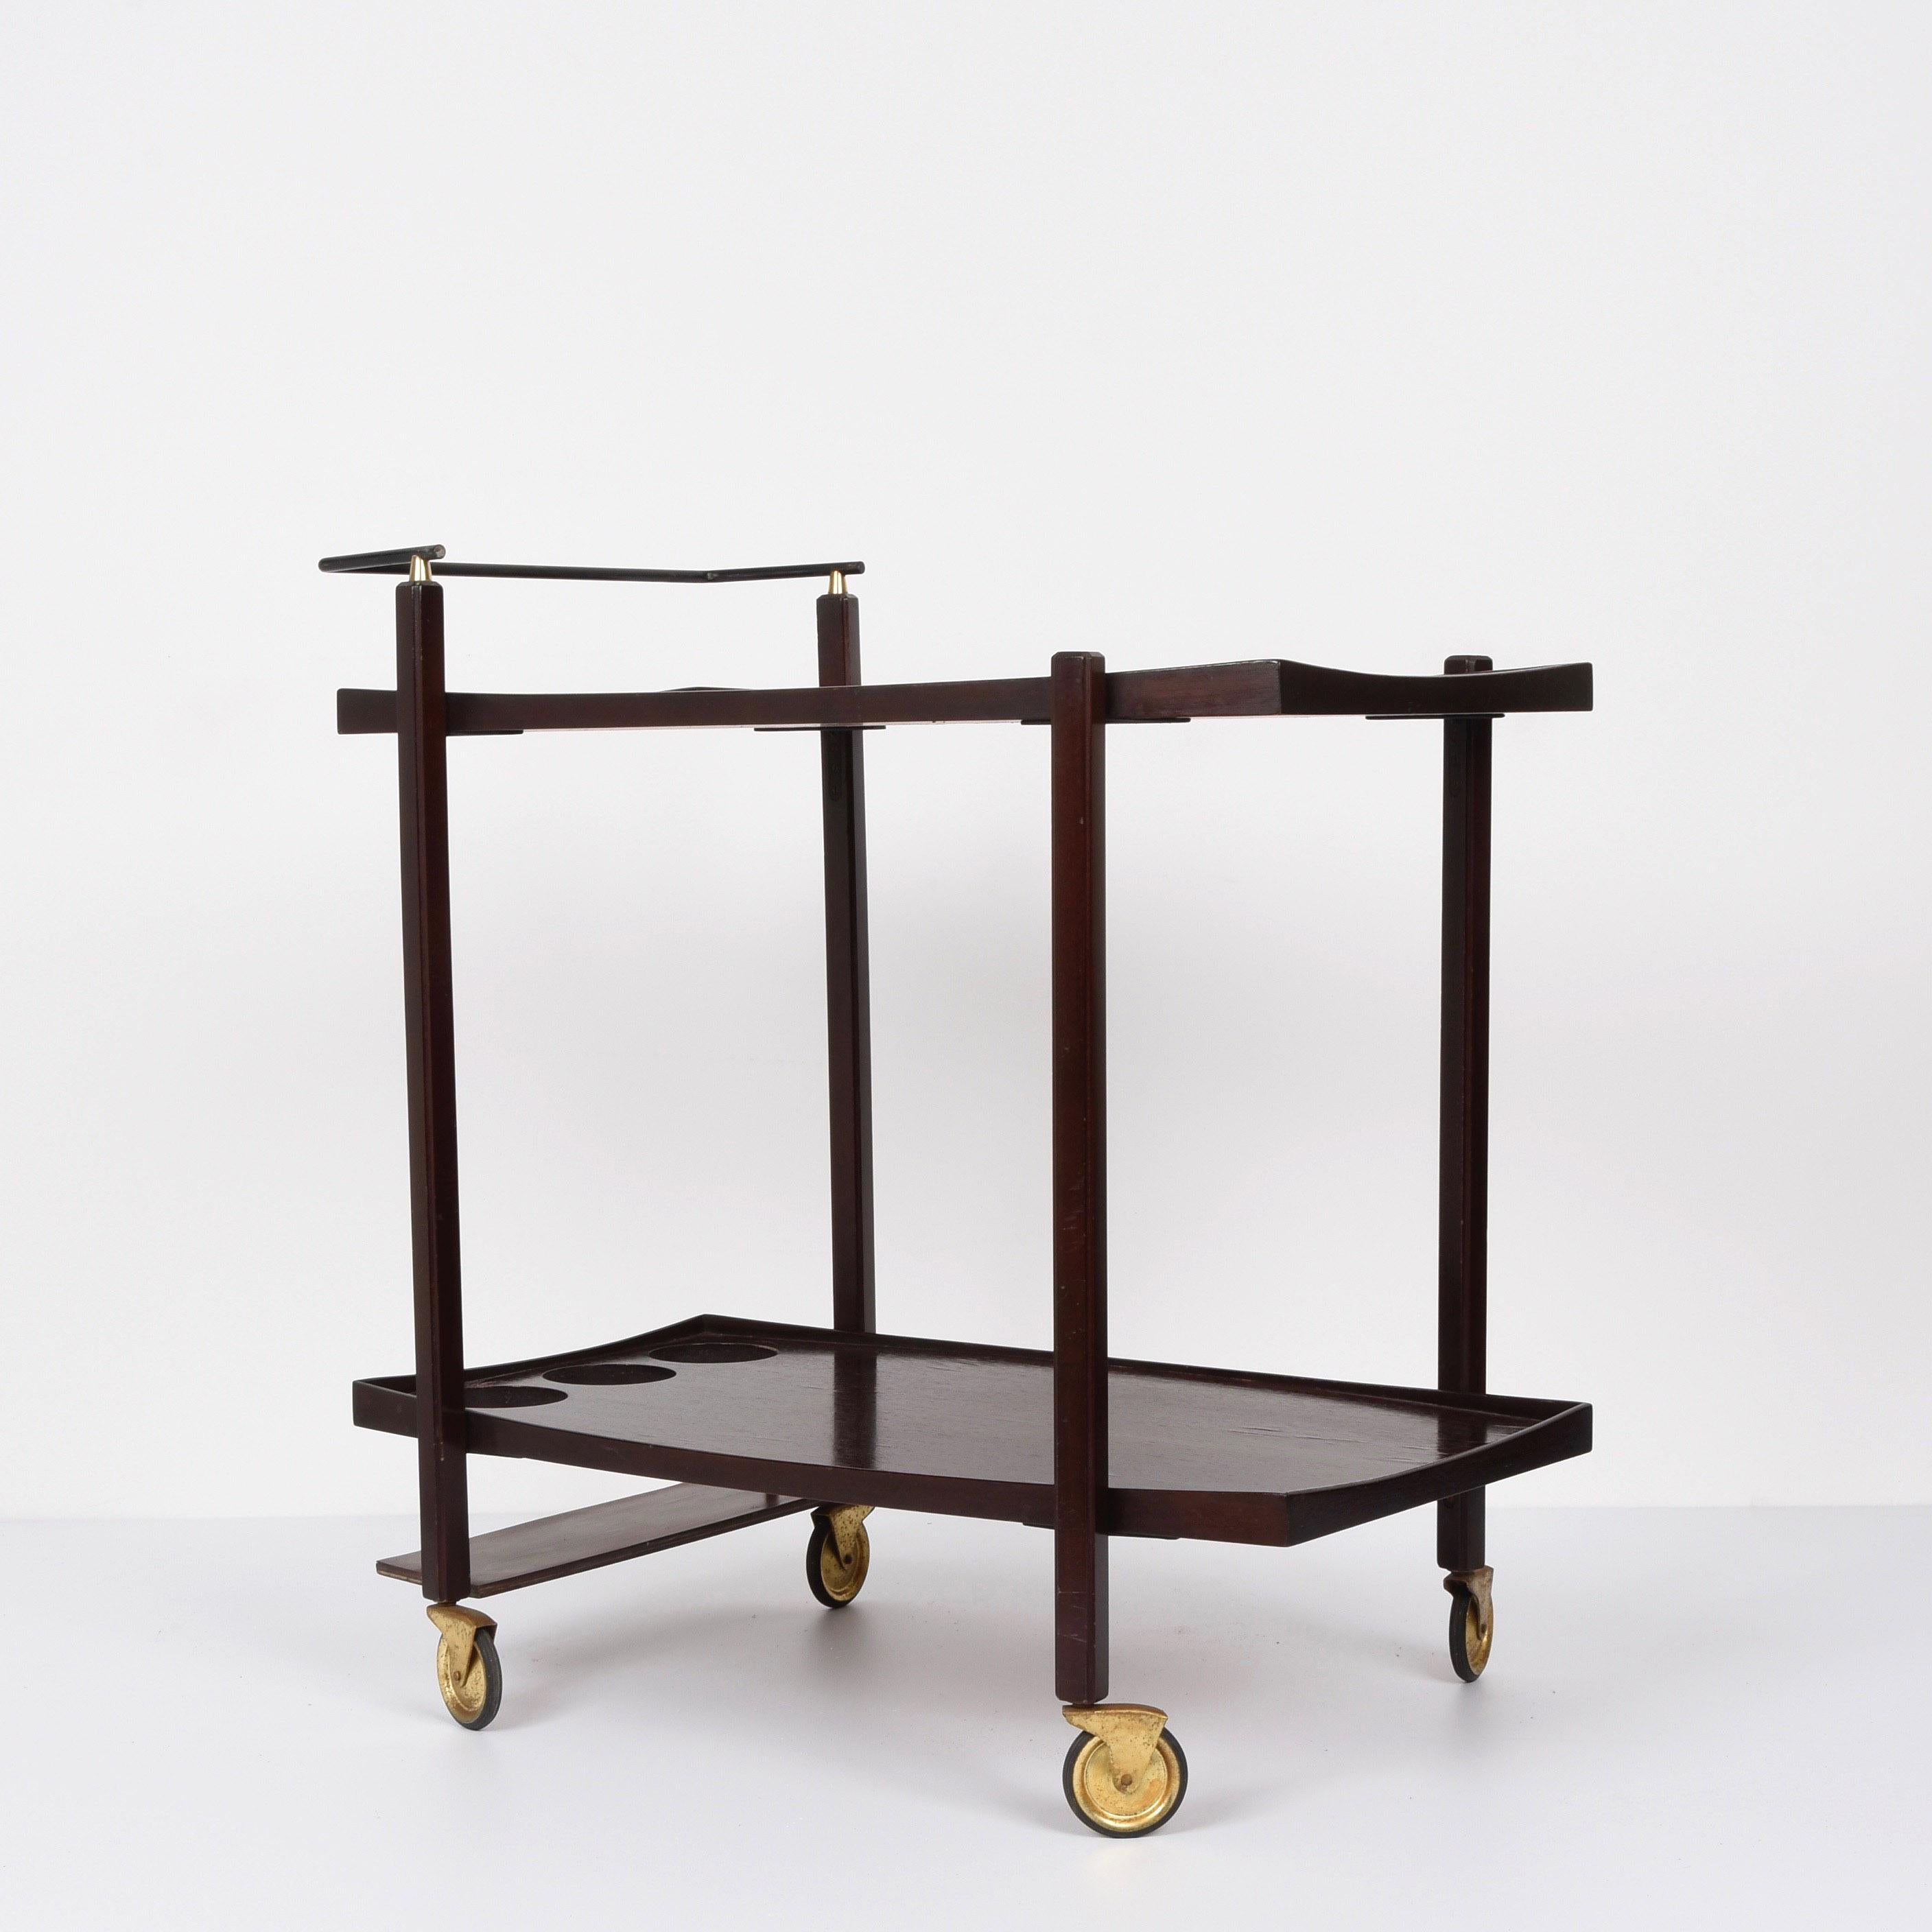 Mid-20th Century Midcentury Wood Serving Bar Cart with Enameled Metal Bottle Holder, 1960s For Sale